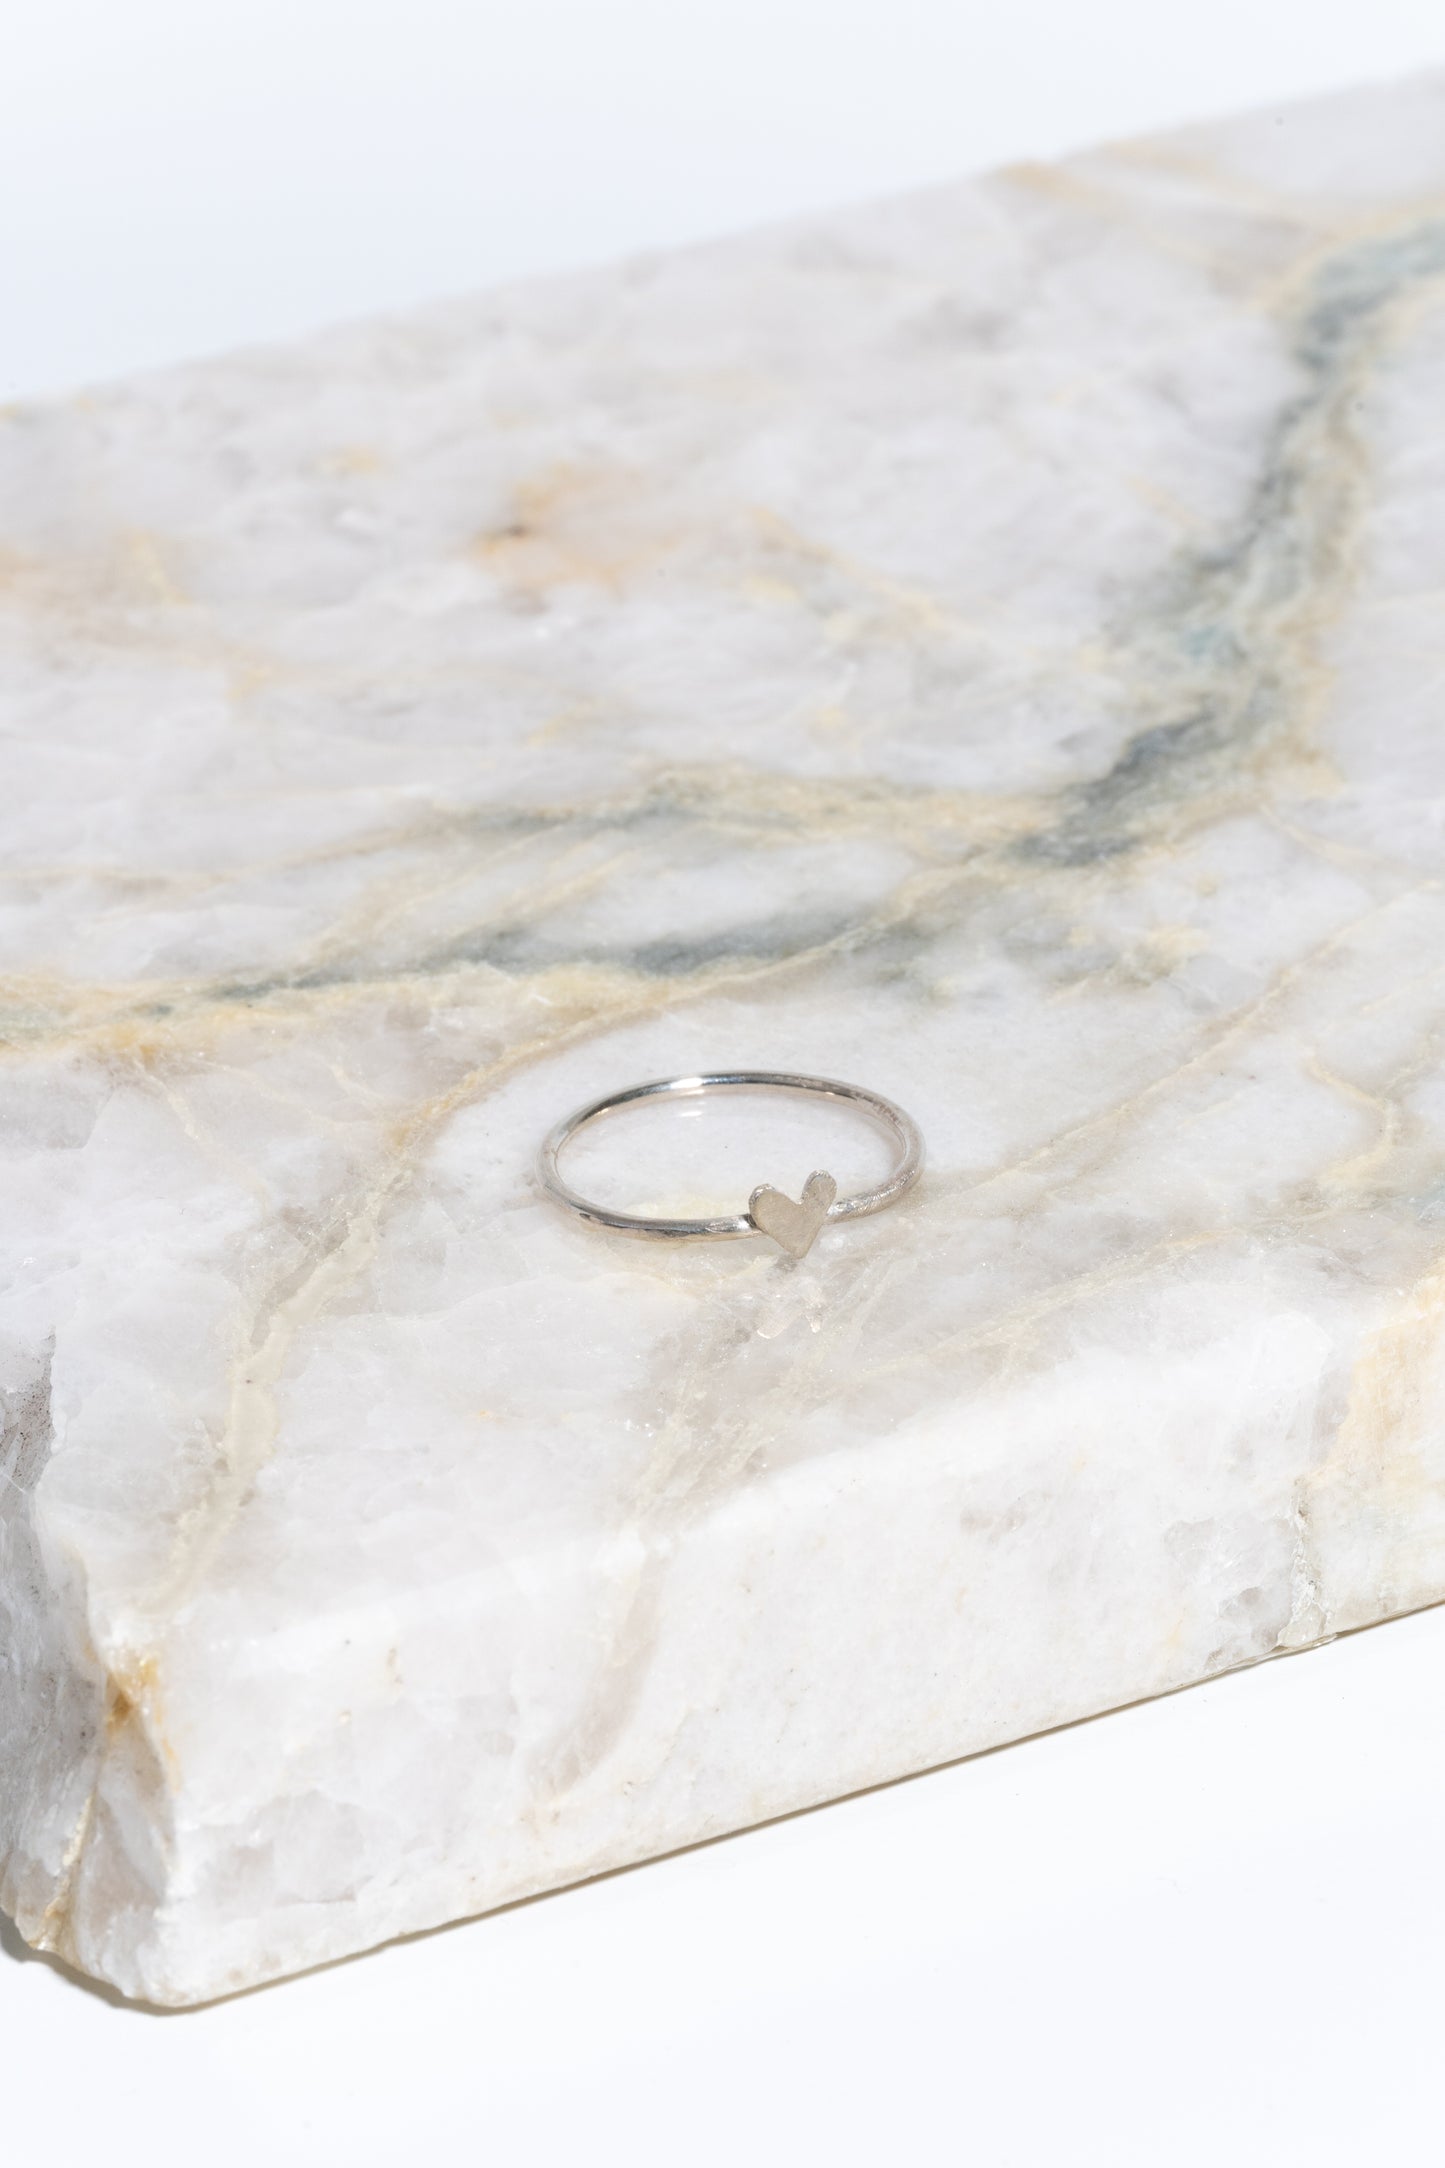 Dainty heart stacking ring in sterling silver